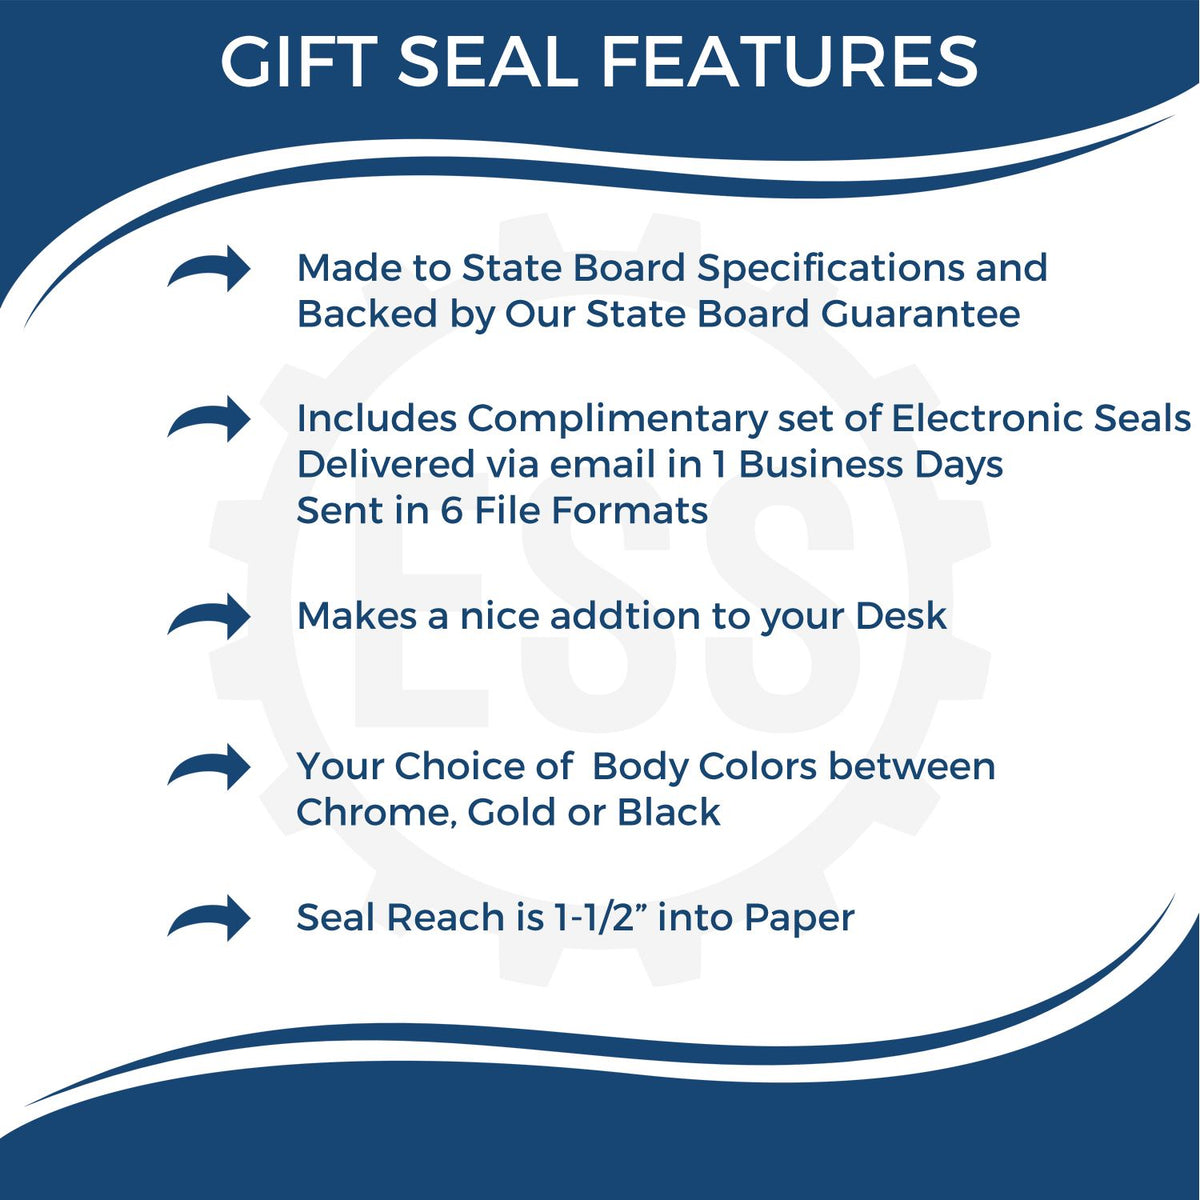 A picture of an infographic highlighting the selling points for the Gift Louisiana Land Surveyor Seal